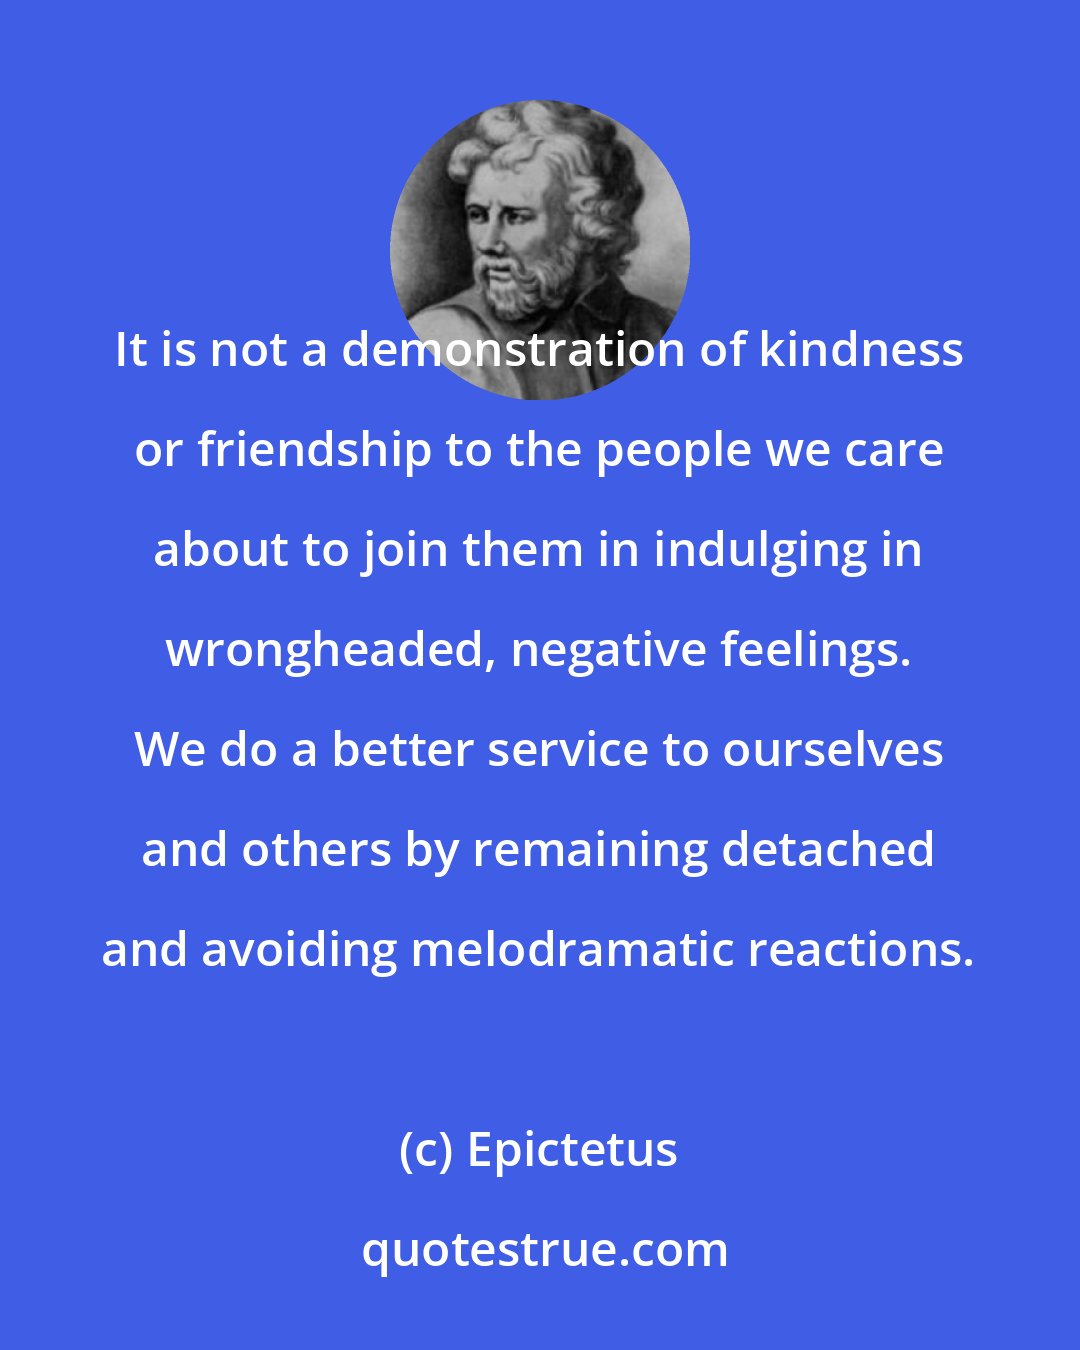 Epictetus: It is not a demonstration of kindness or friendship to the people we care about to join them in indulging in wrongheaded, negative feelings. We do a better service to ourselves and others by remaining detached and avoiding melodramatic reactions.